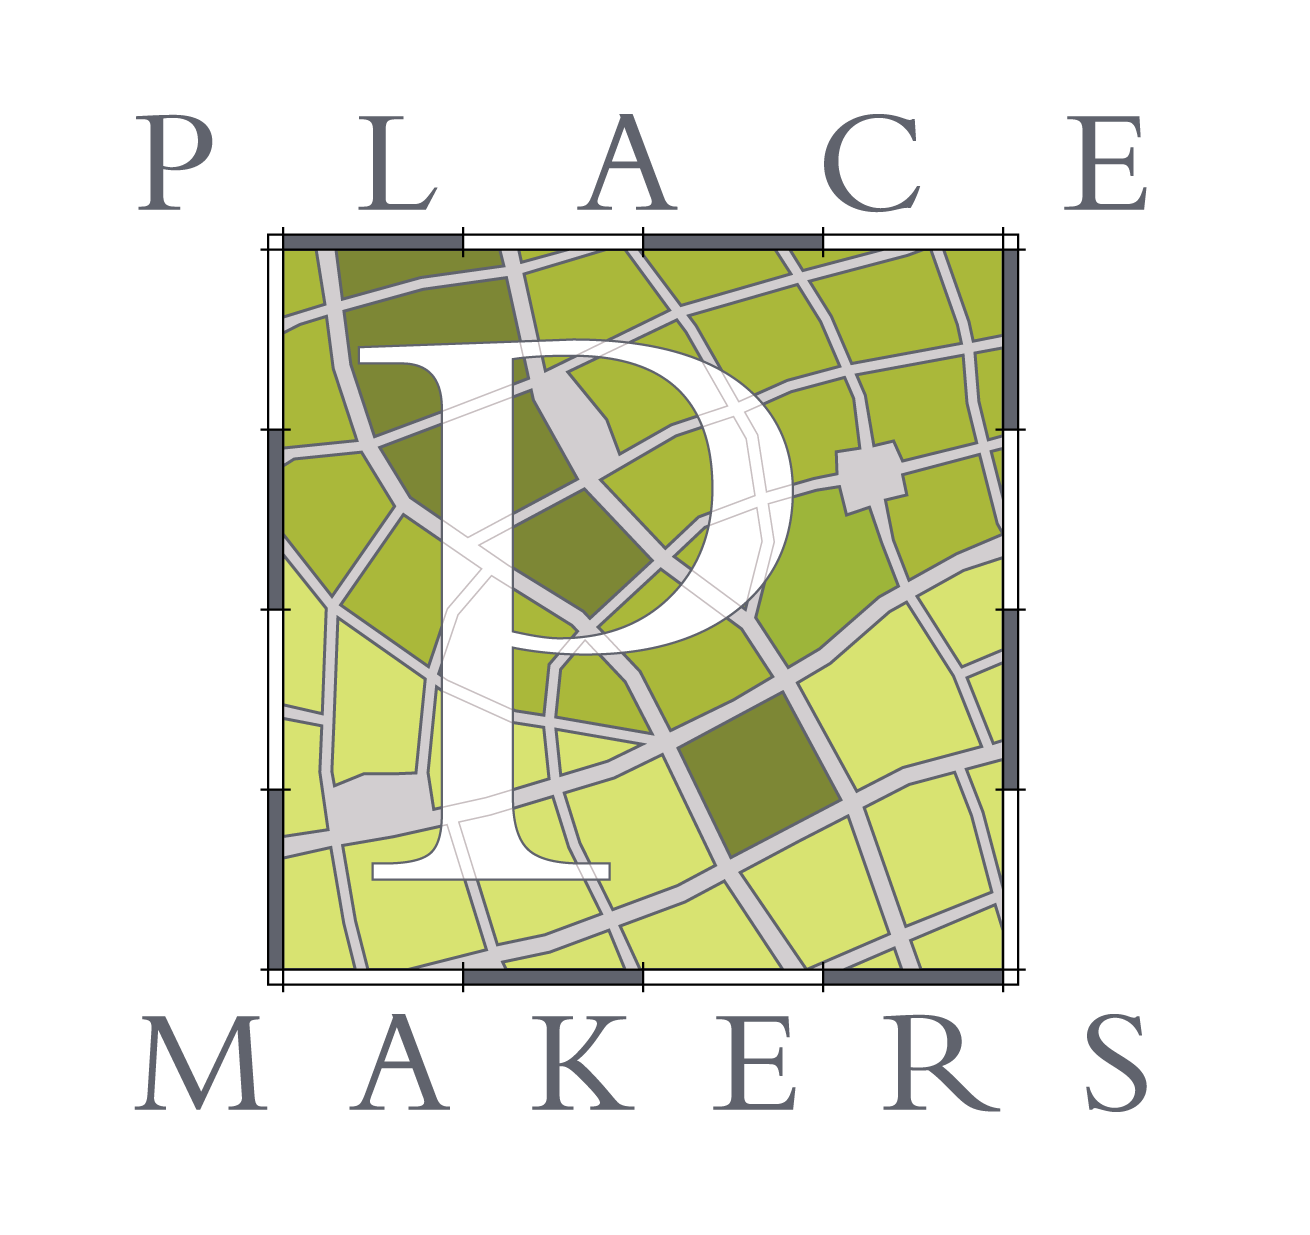 “PlaceMakers”